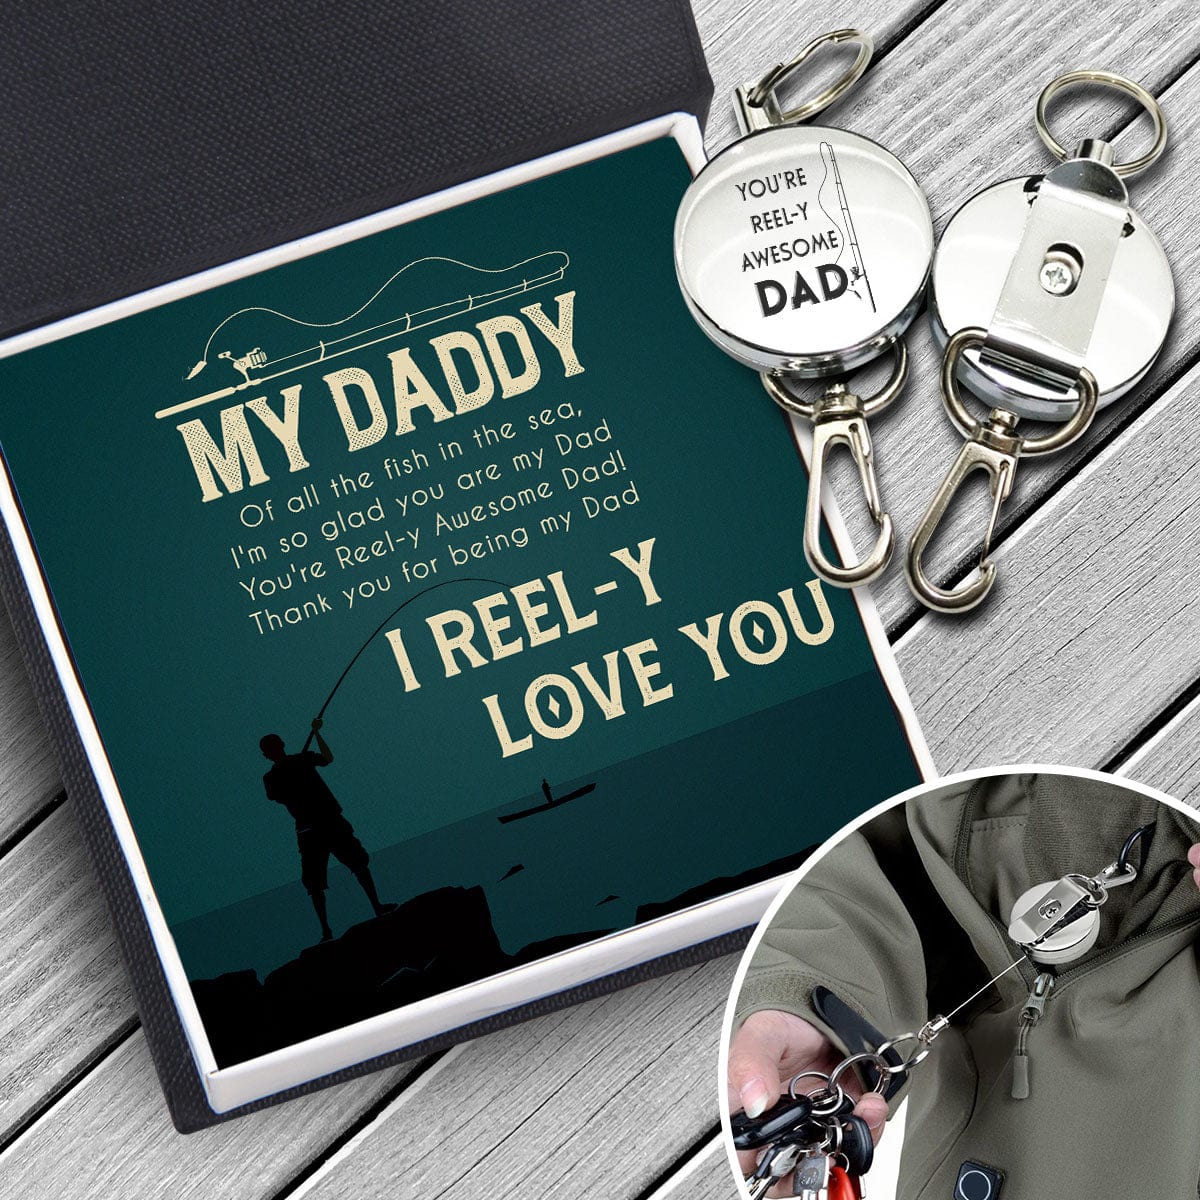 Retractable Pull Keychain - Fishing - To My Dad - You're Reel-y Awesome Dad - Gkze18002